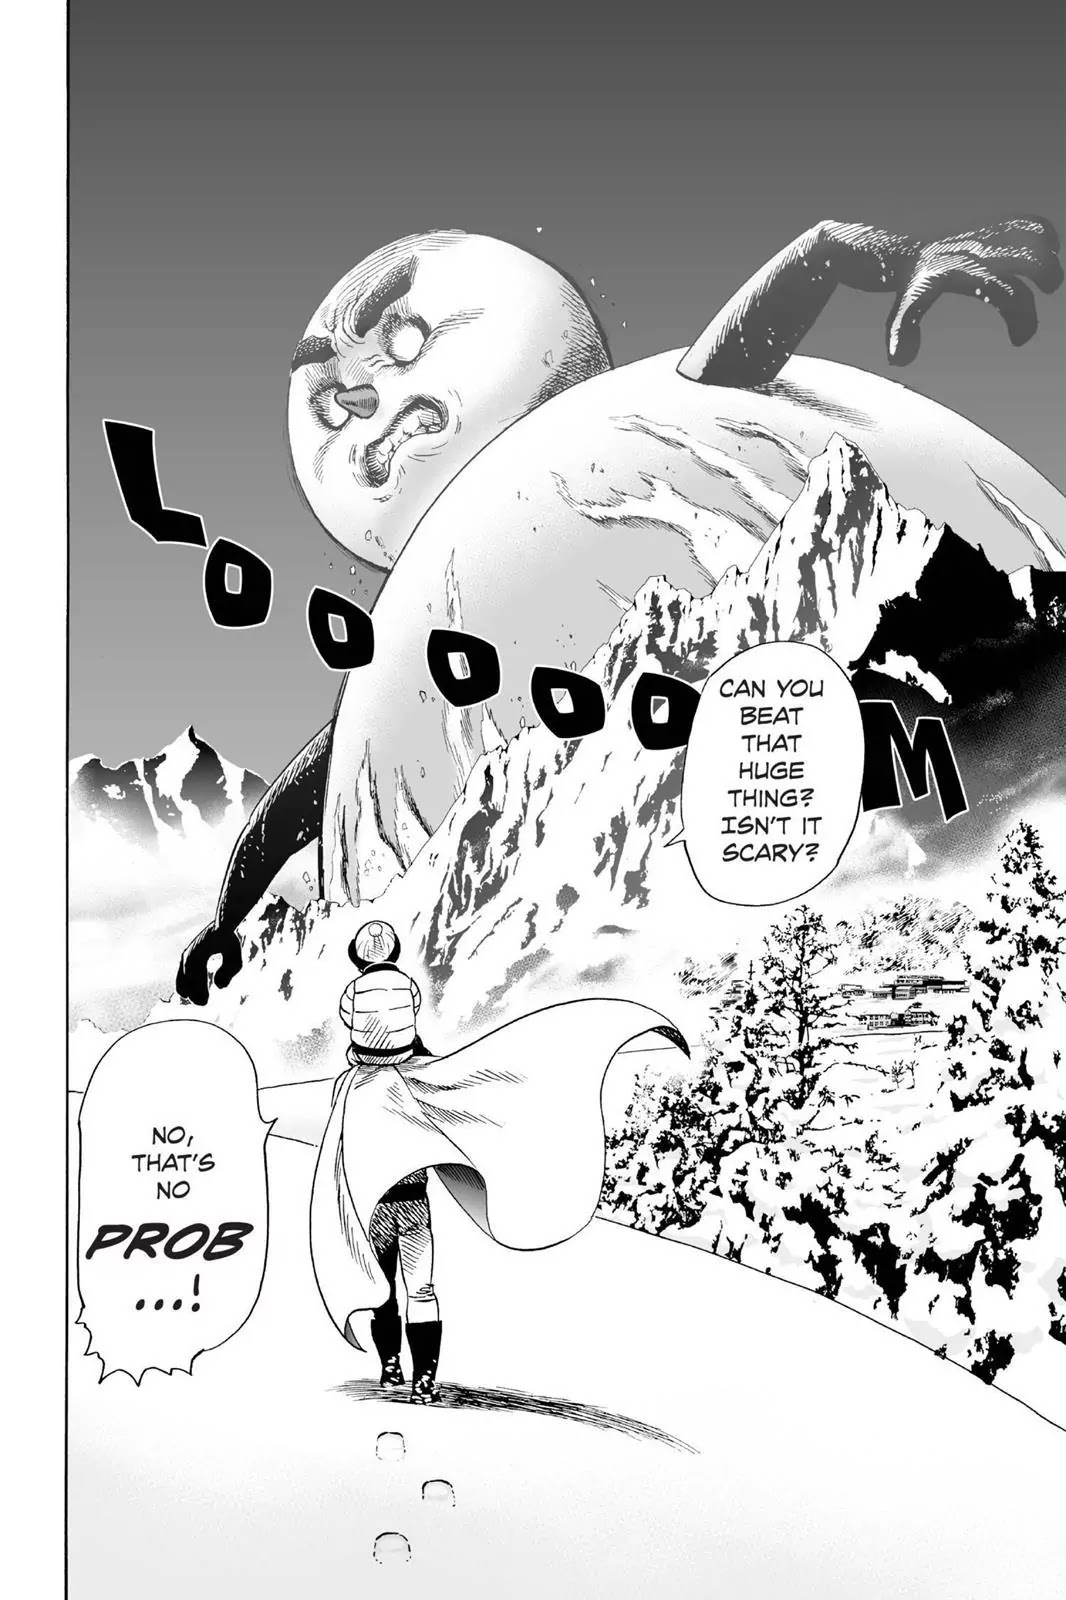 One-Punch Man Chapter 8.5